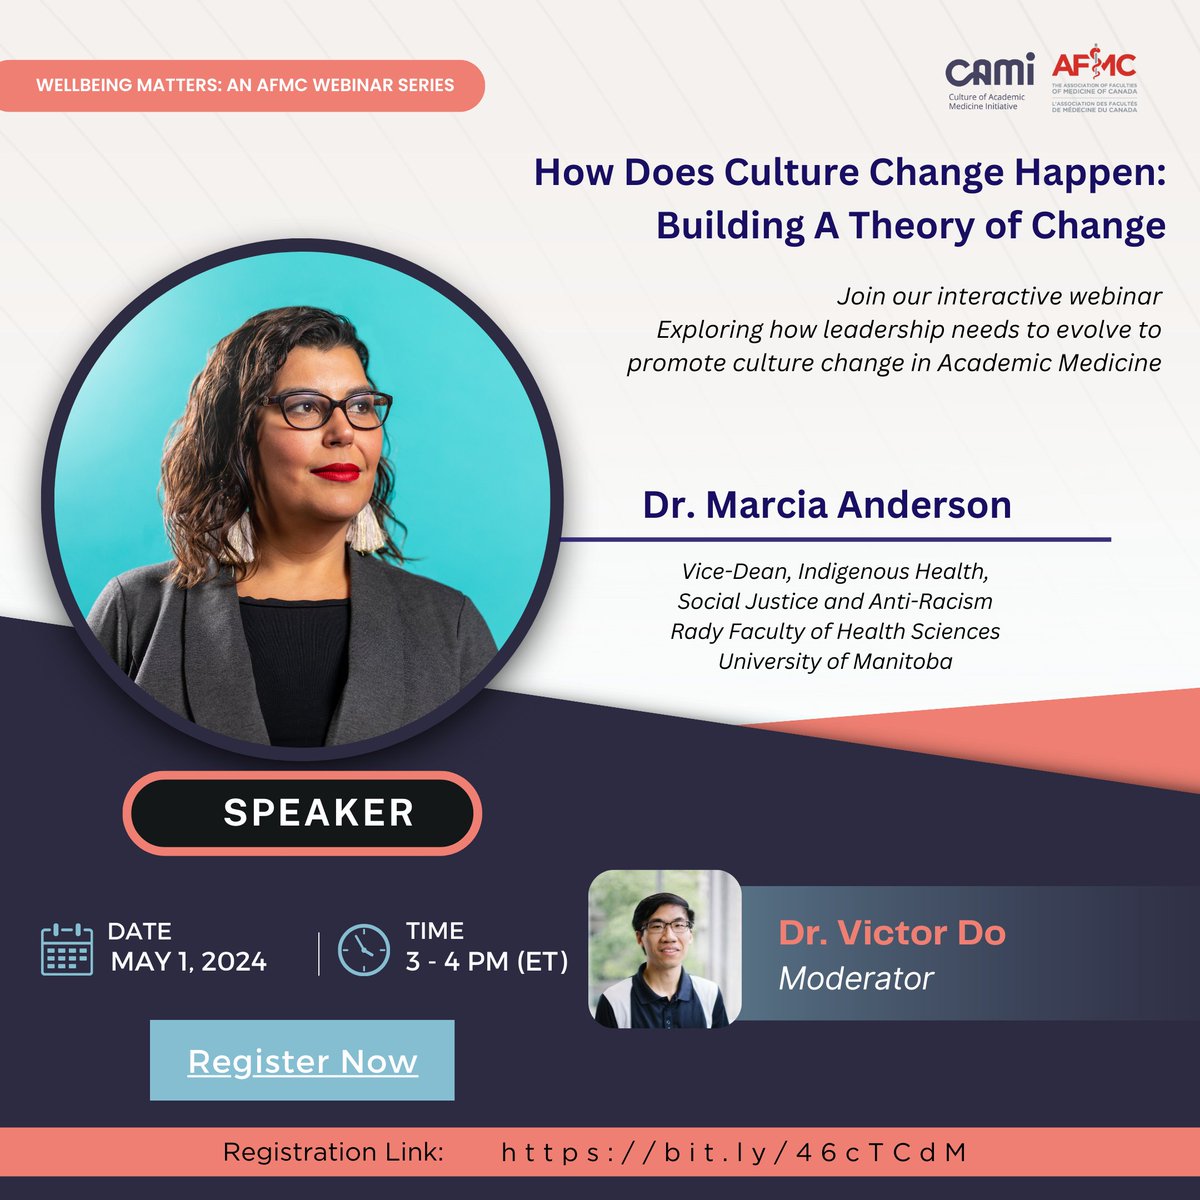 Just ONE HOUR left until our webinar featuring @MarciaJAnderson begins! Don't miss this opportunity to gain invaluable insights into the crucial role of leadership in driving culture change. Join us for this enlightening discussion: bit.ly/46cTCdM #MedEd #CAMi